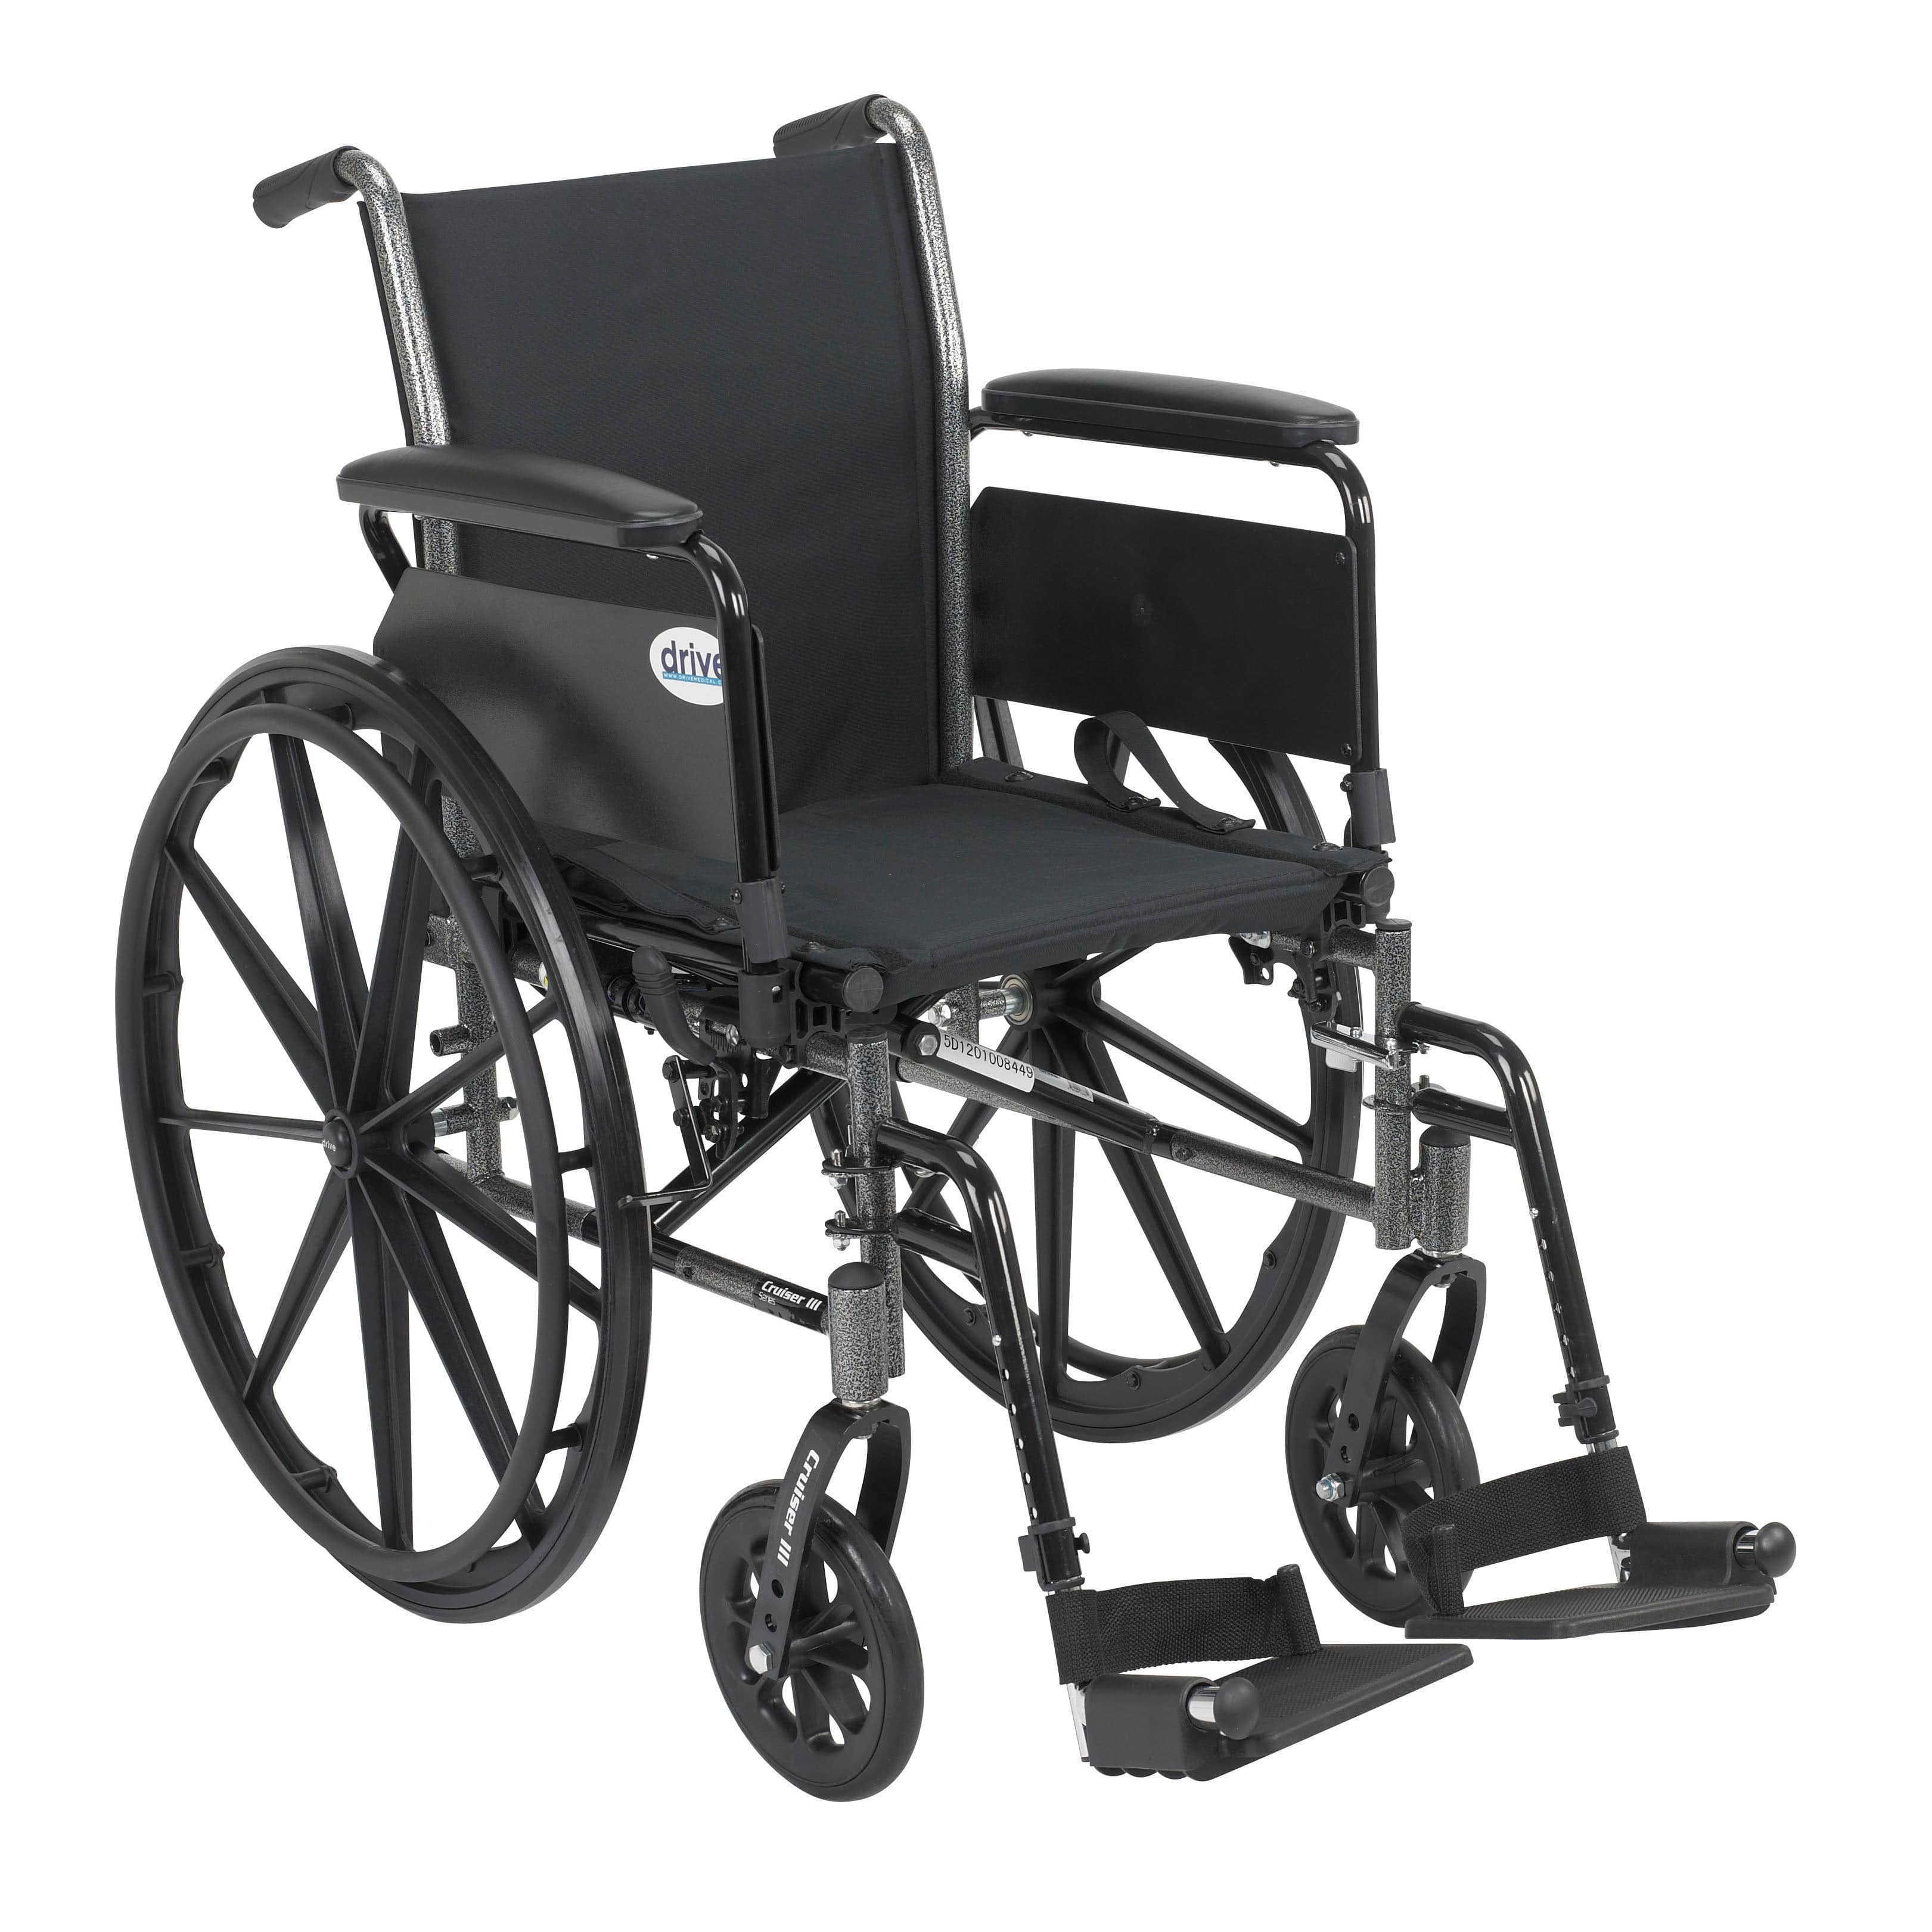 Drive Medical Wheelchairs Flip Back Removable Full Arms and Swing away Footrests / 16" Seat Drive Medical Cruiser III Light Weight Wheelchair with Flip Back Removable Arms